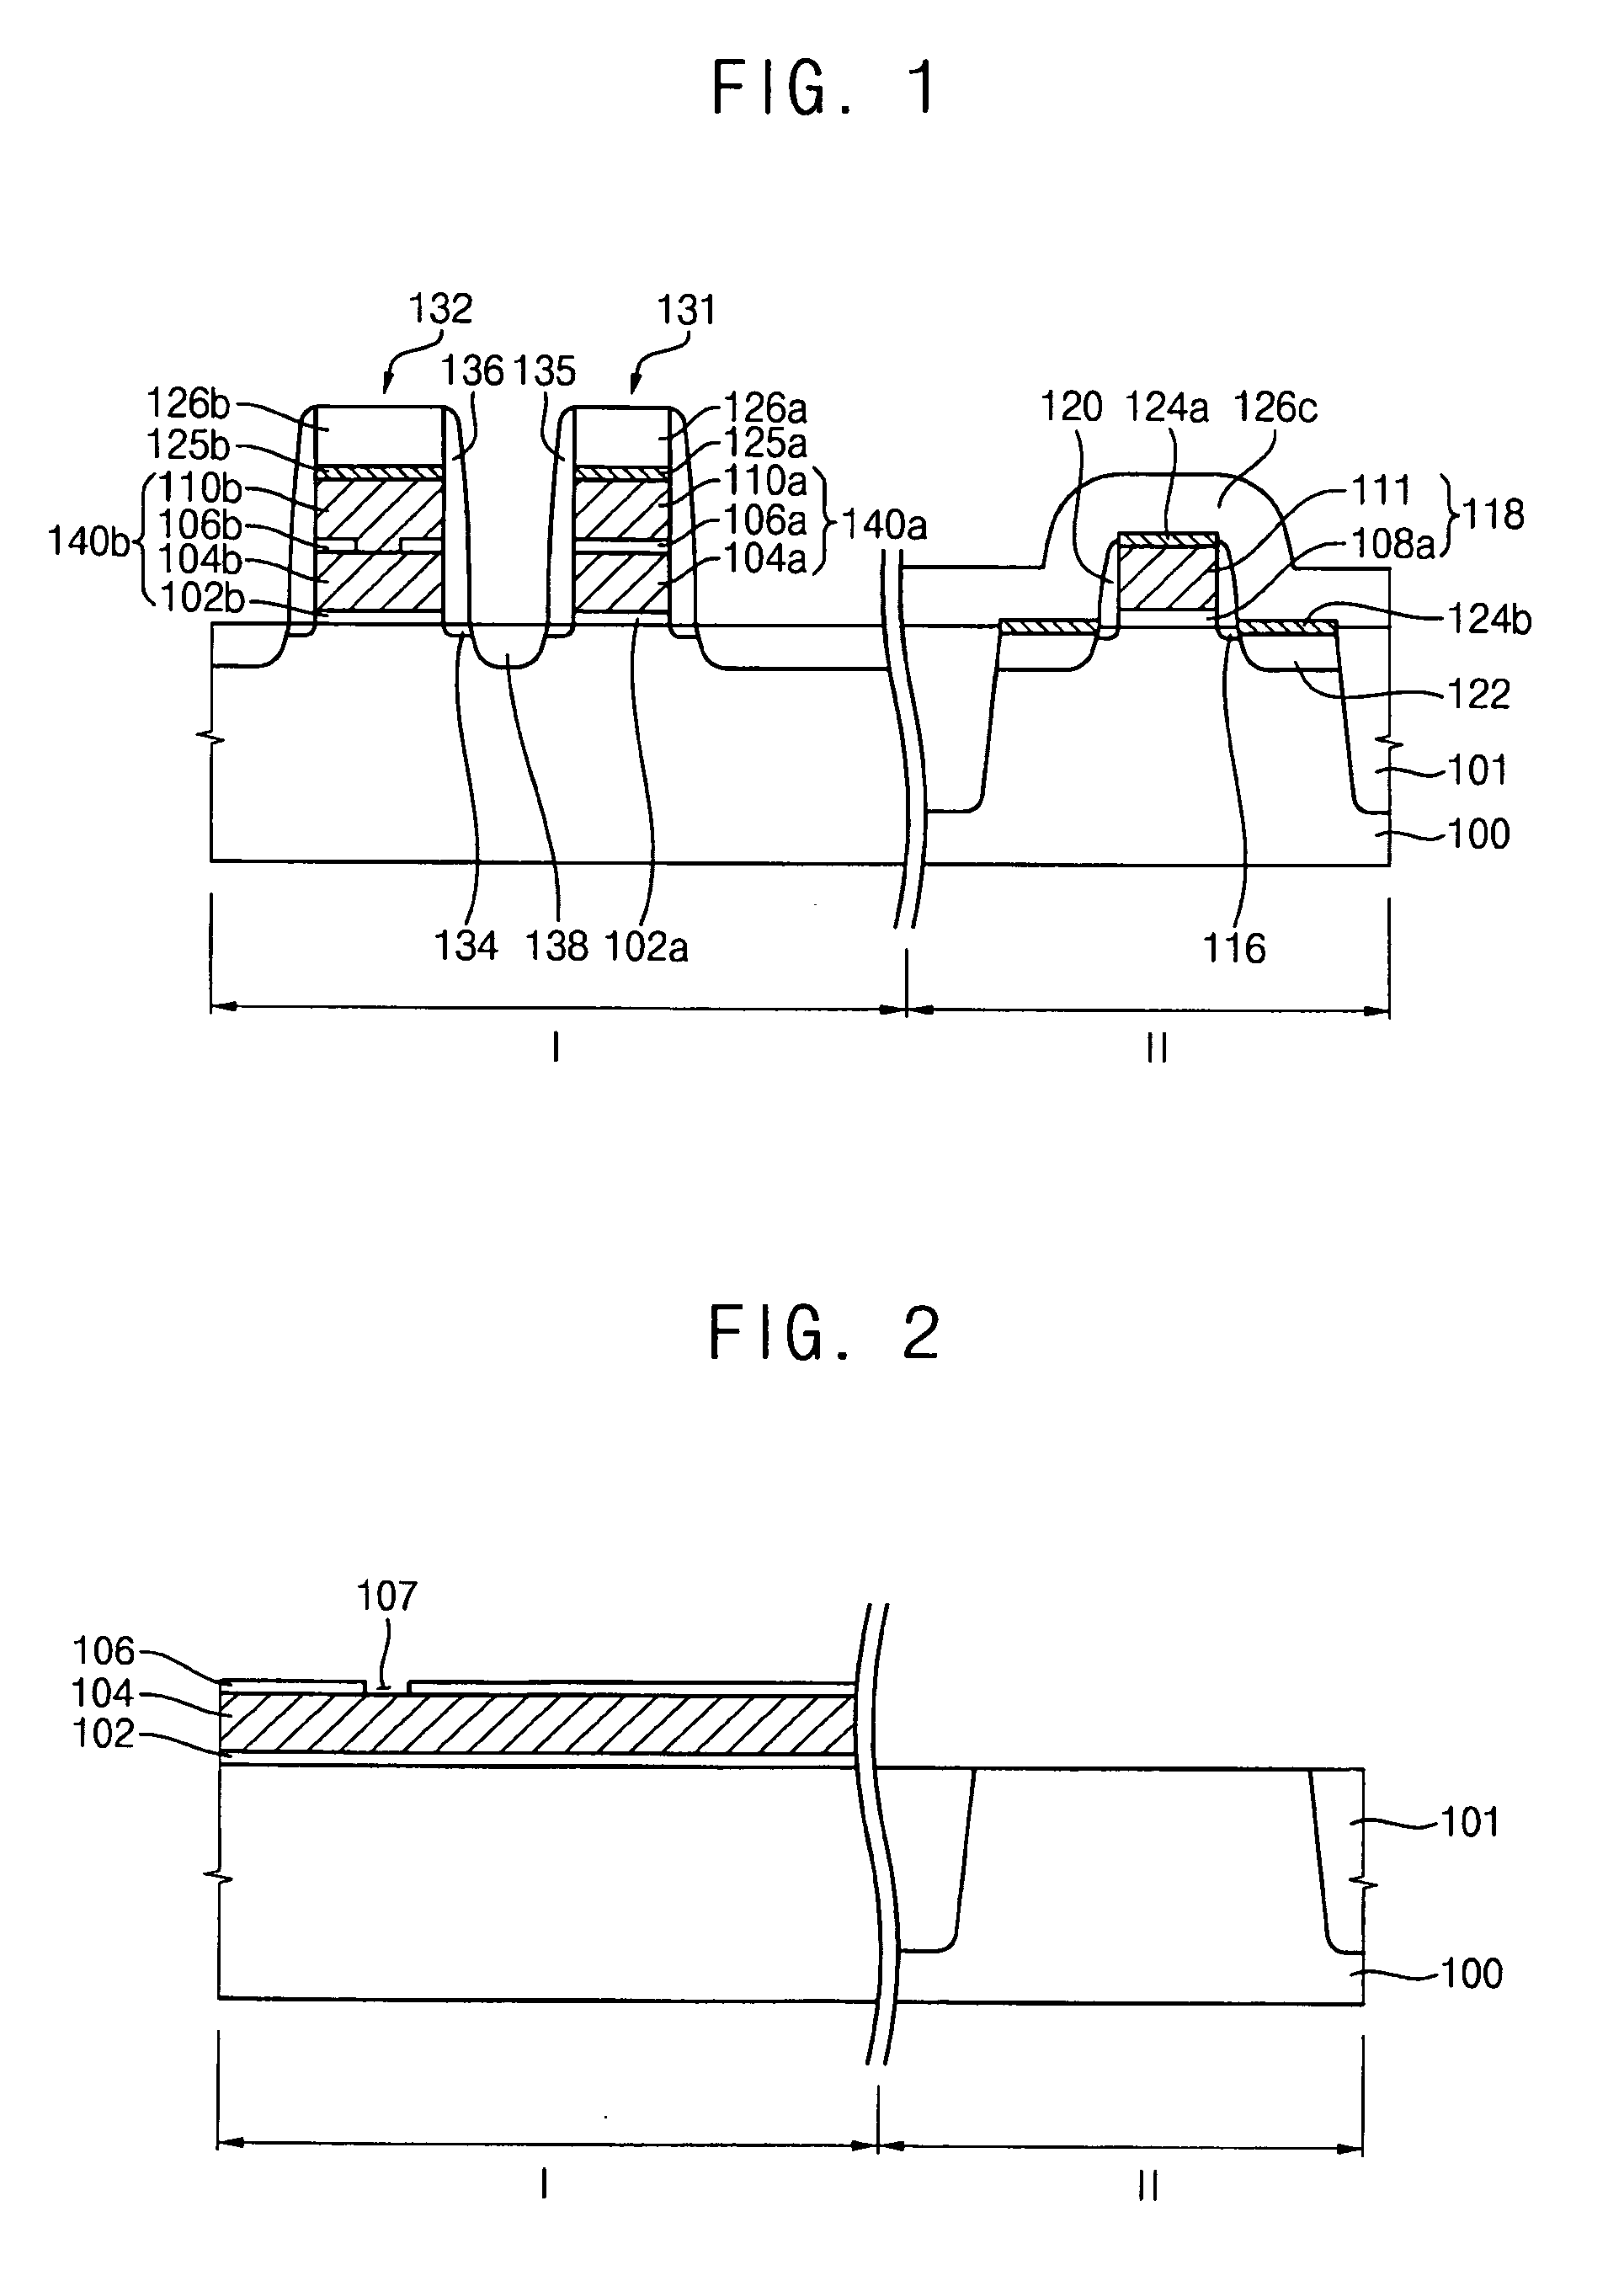 Embedded semiconductor device and method of manufacturing an embedded semiconductor device